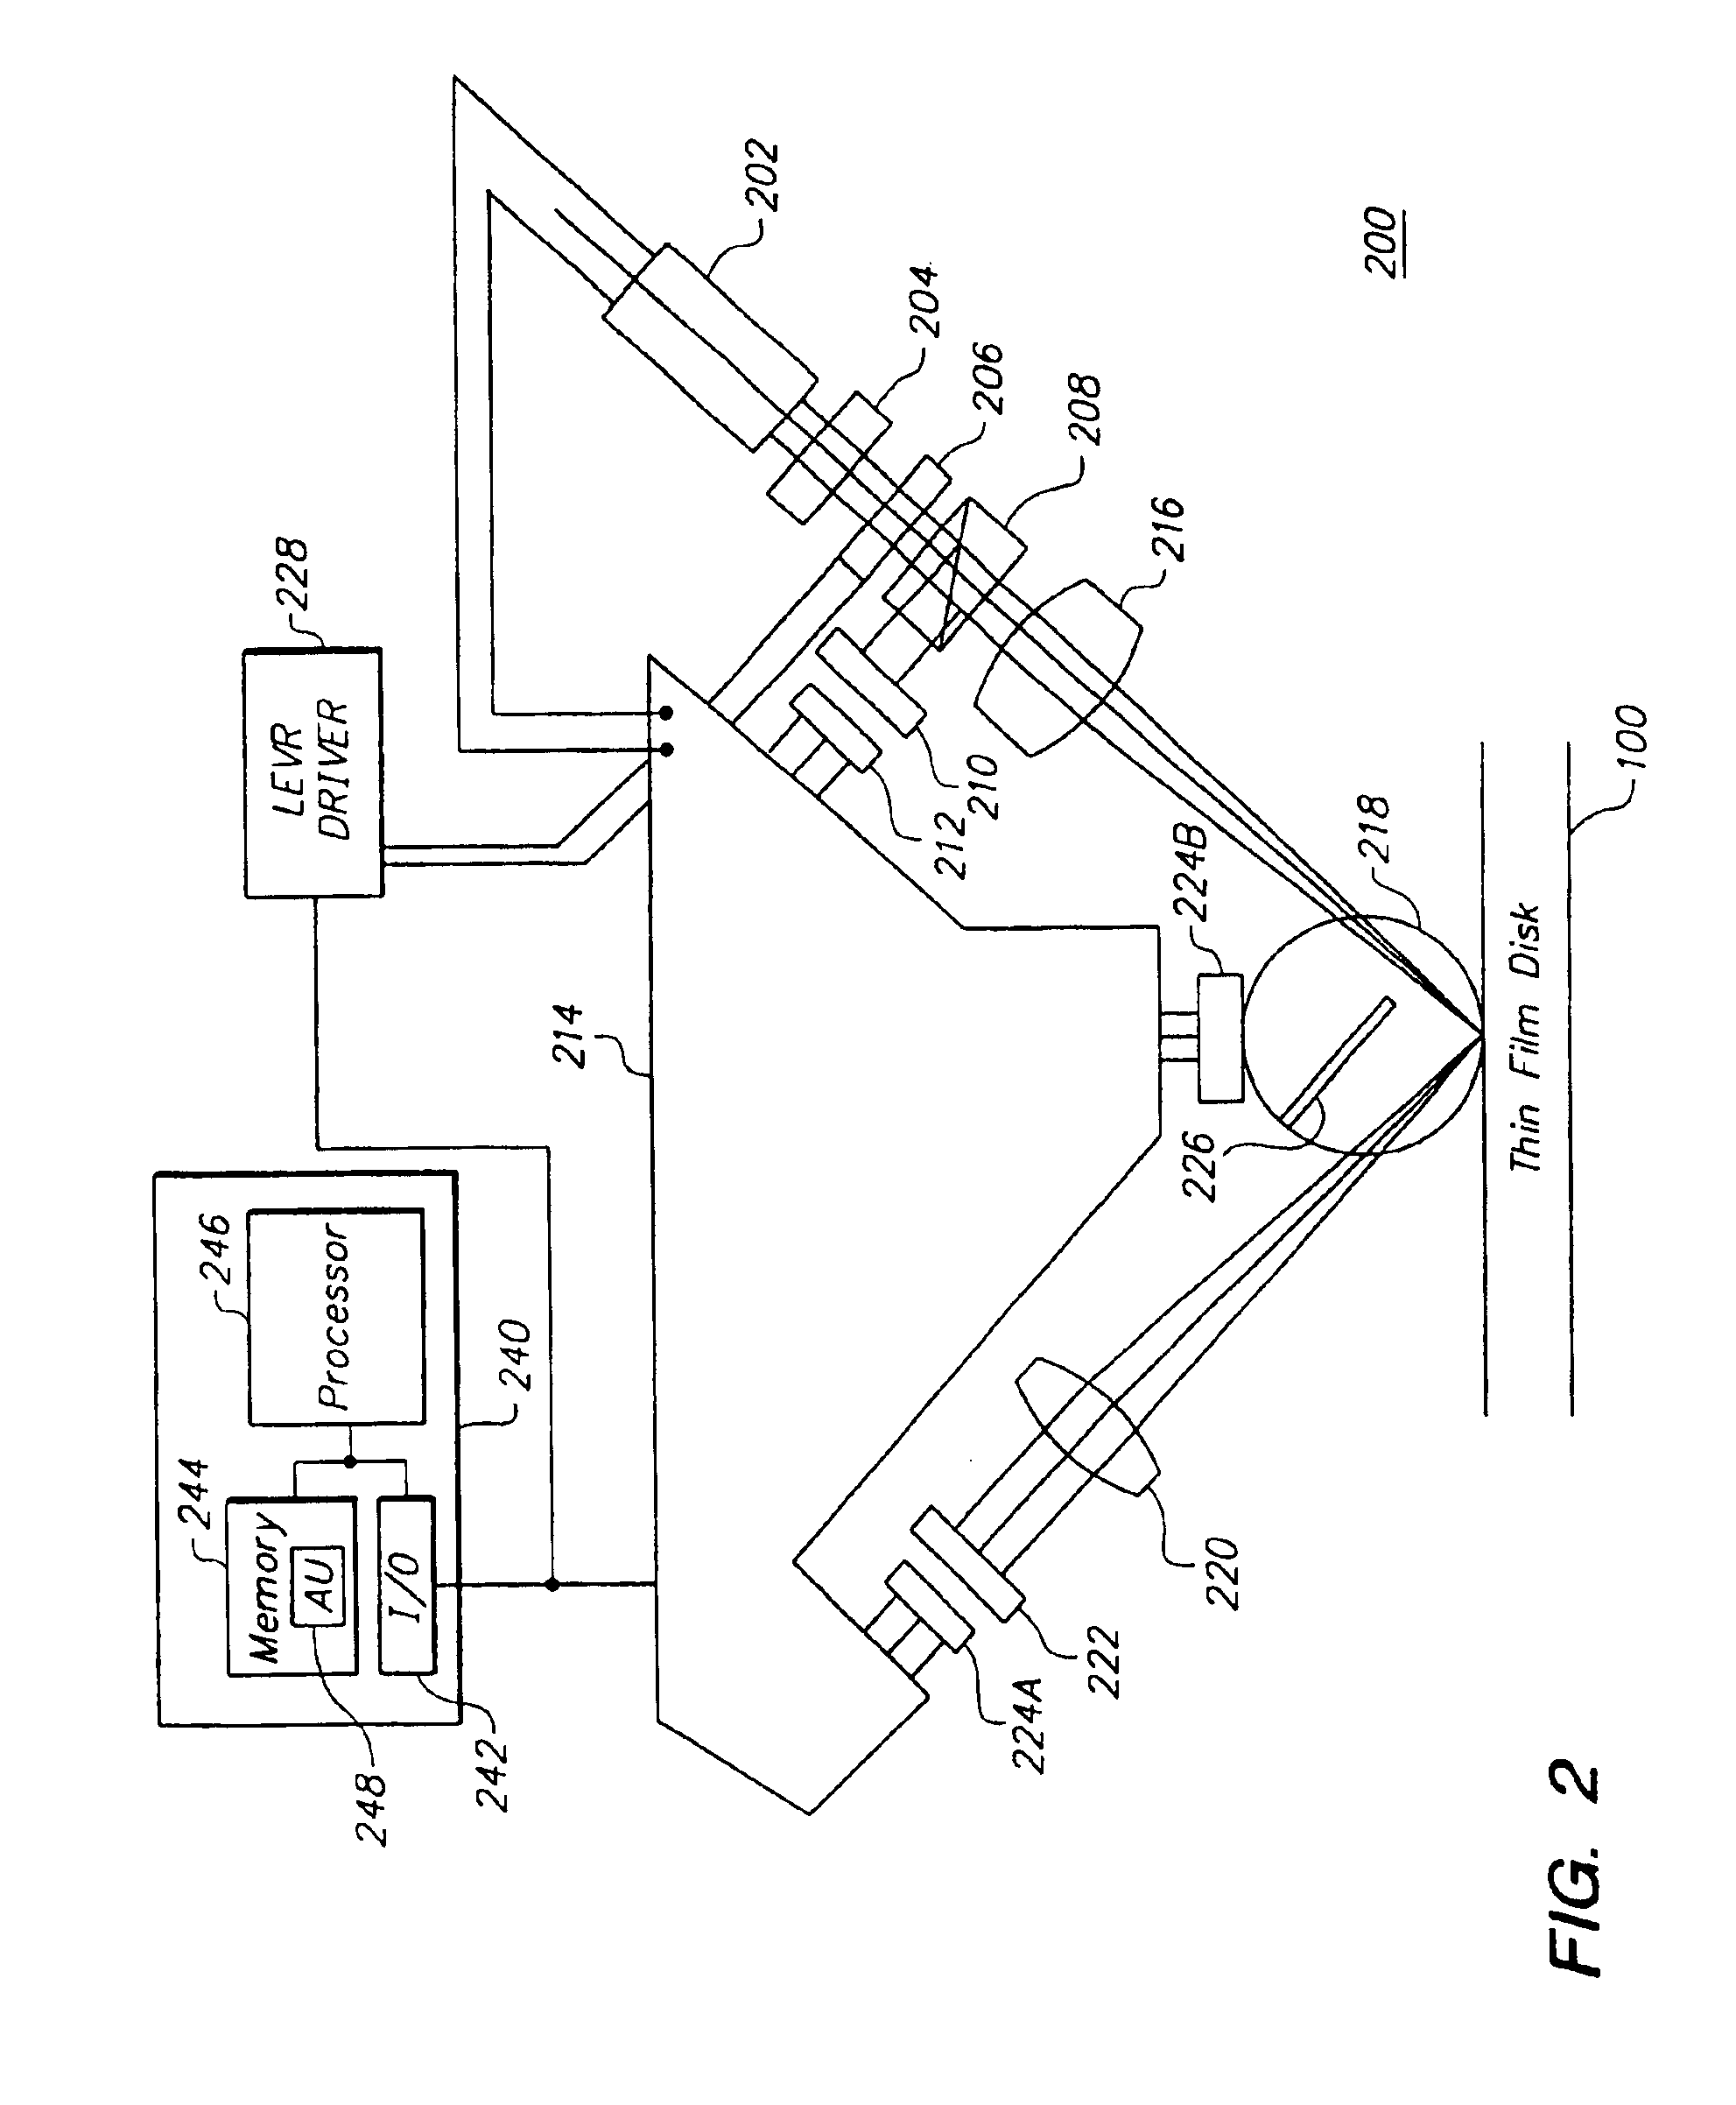 System and method for measuring properties of an object using a phase difference between two reflected light signals